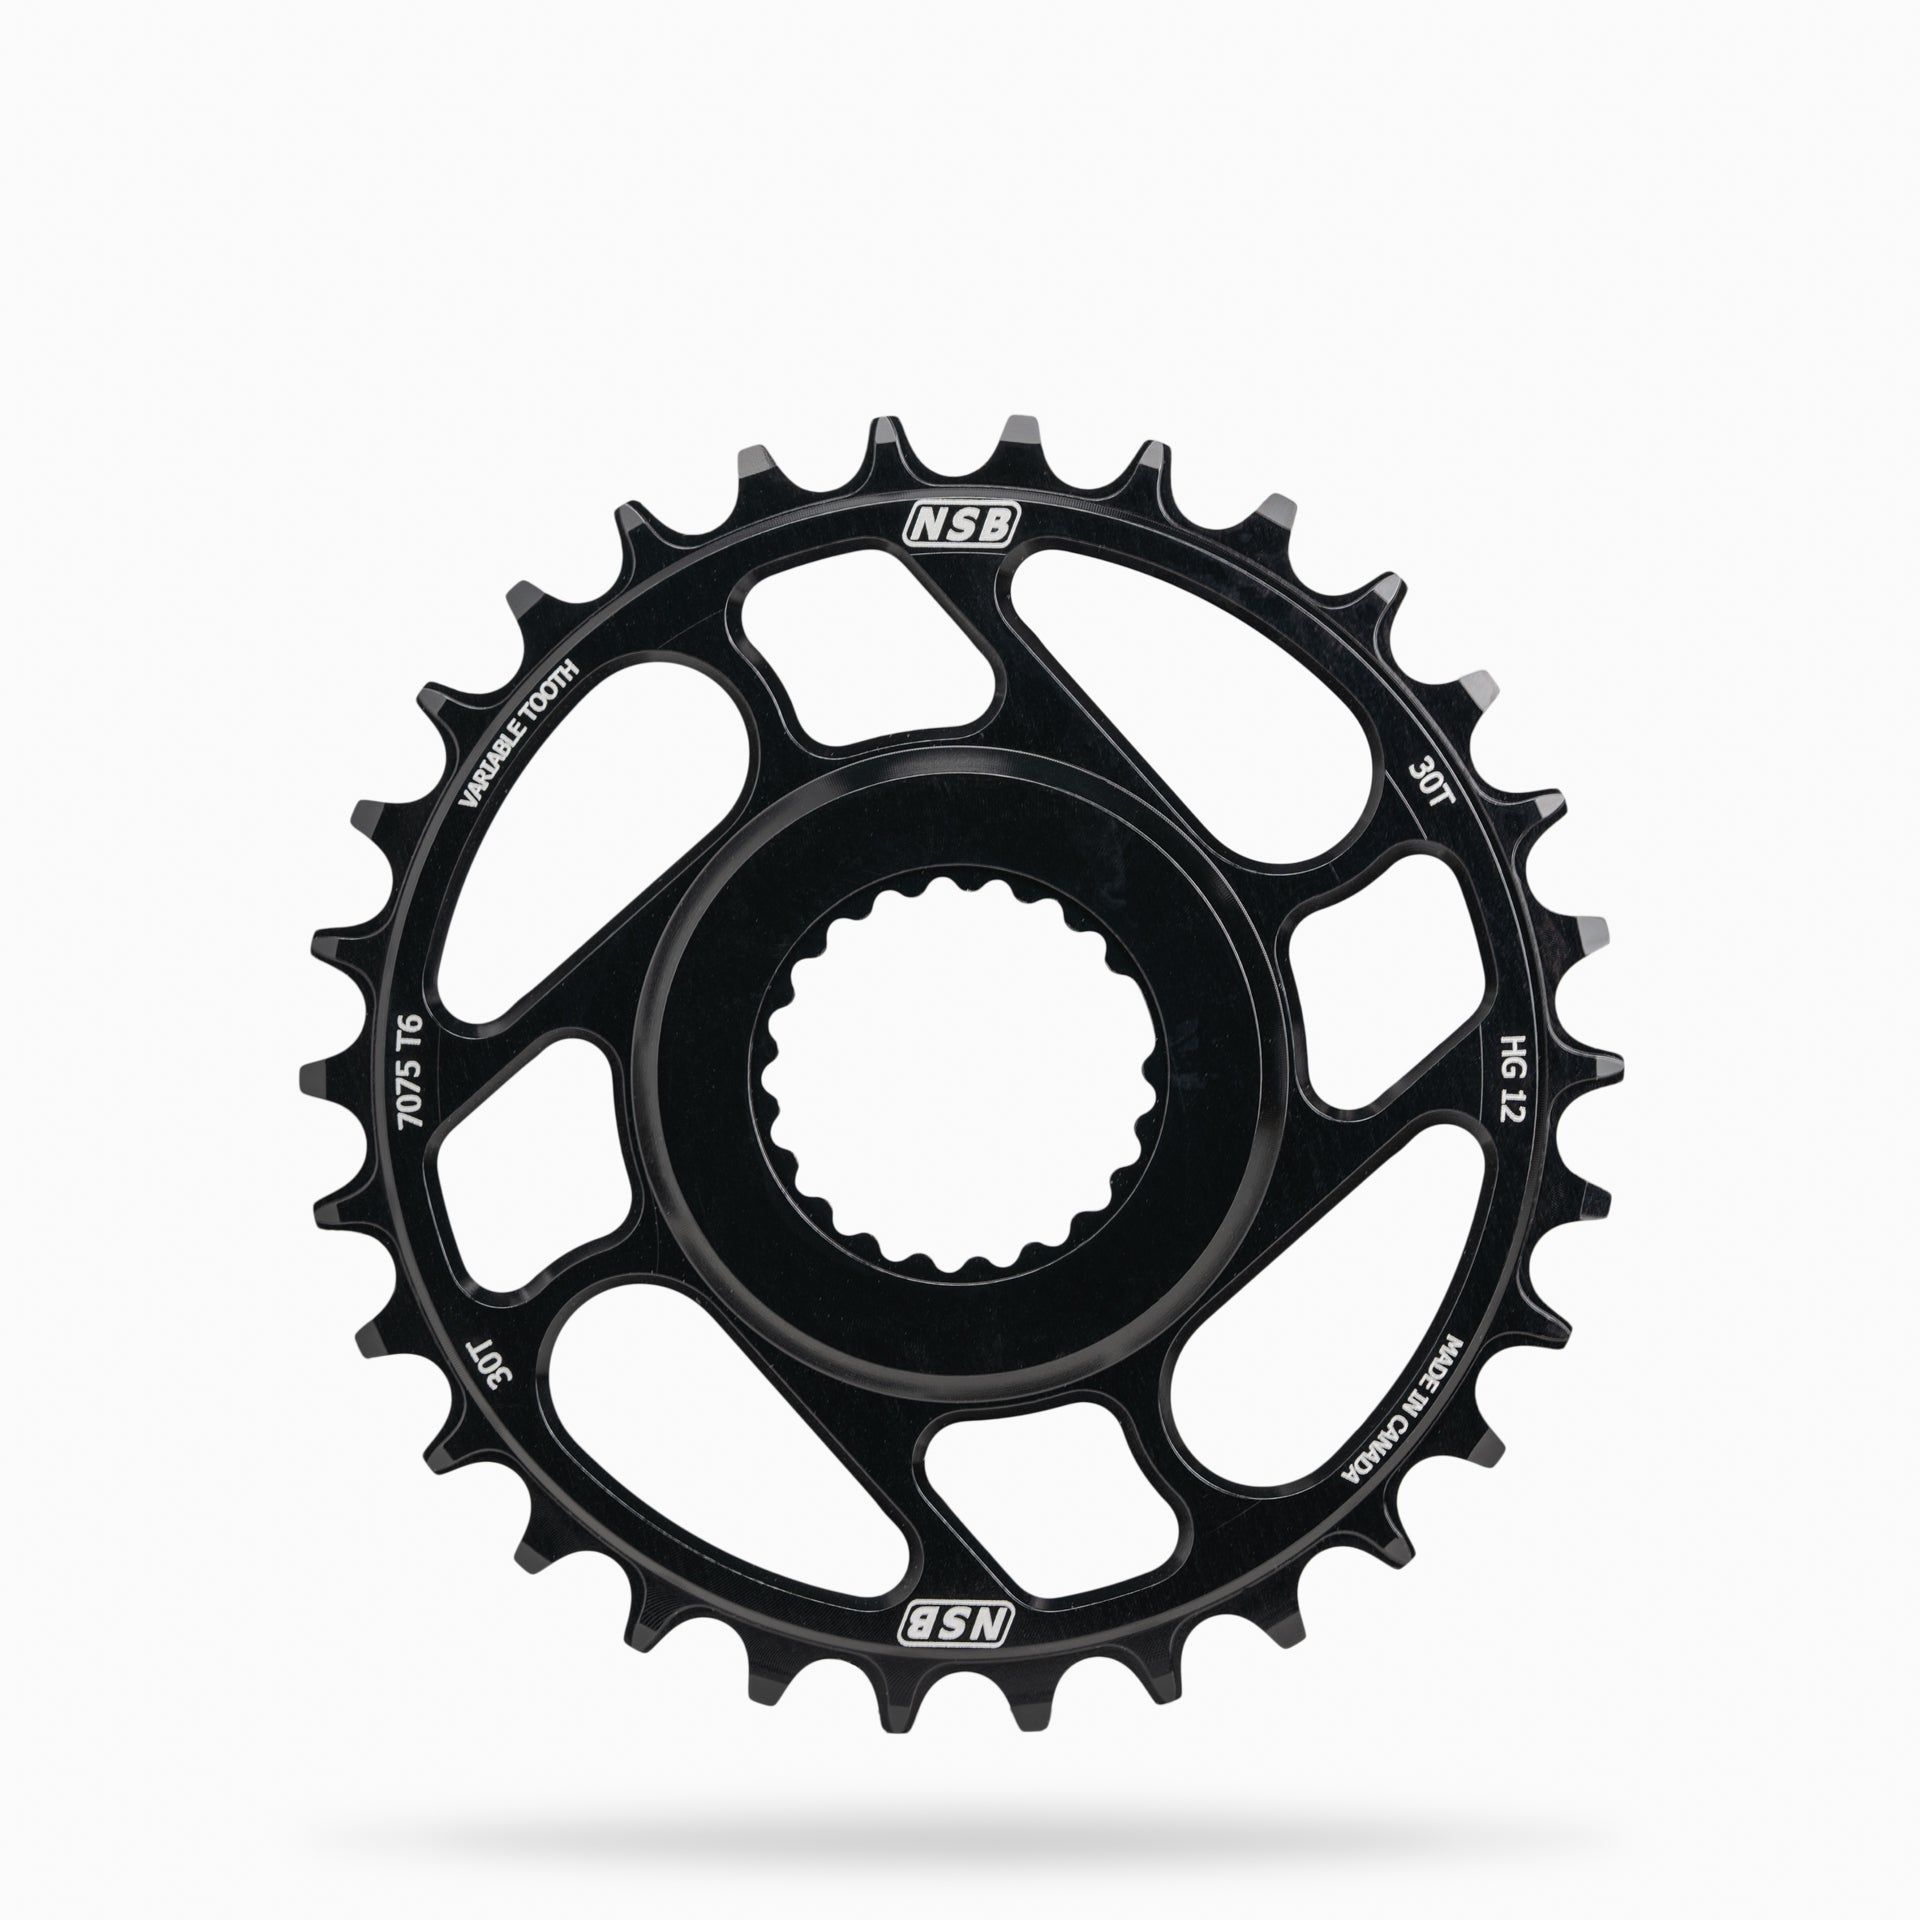 30T Shimano direct mount chainring for 12-speed Shimano drivetrains